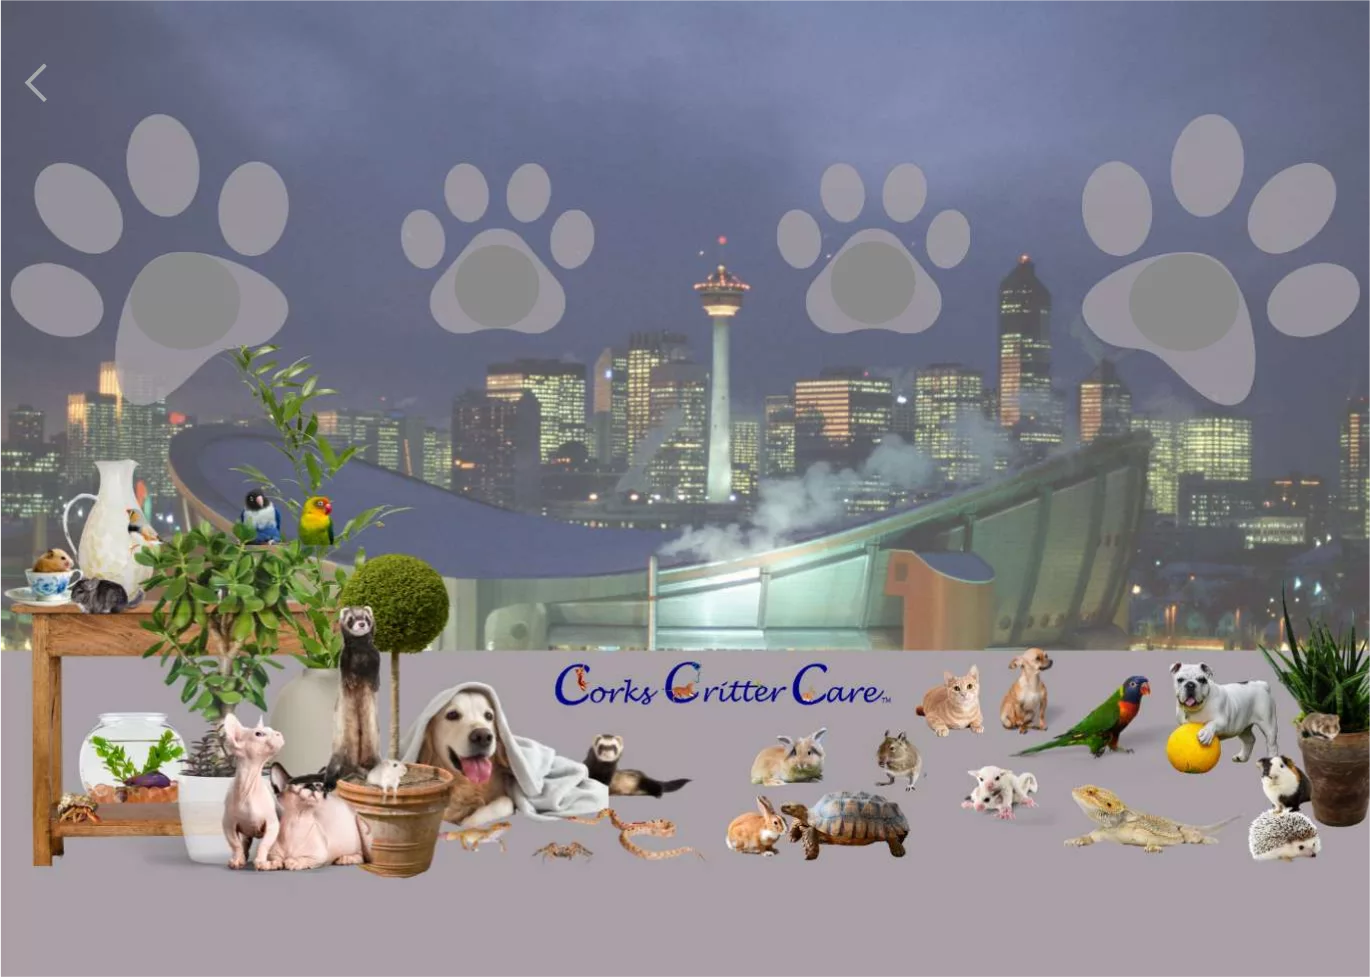 corks critter care calgary virtual background